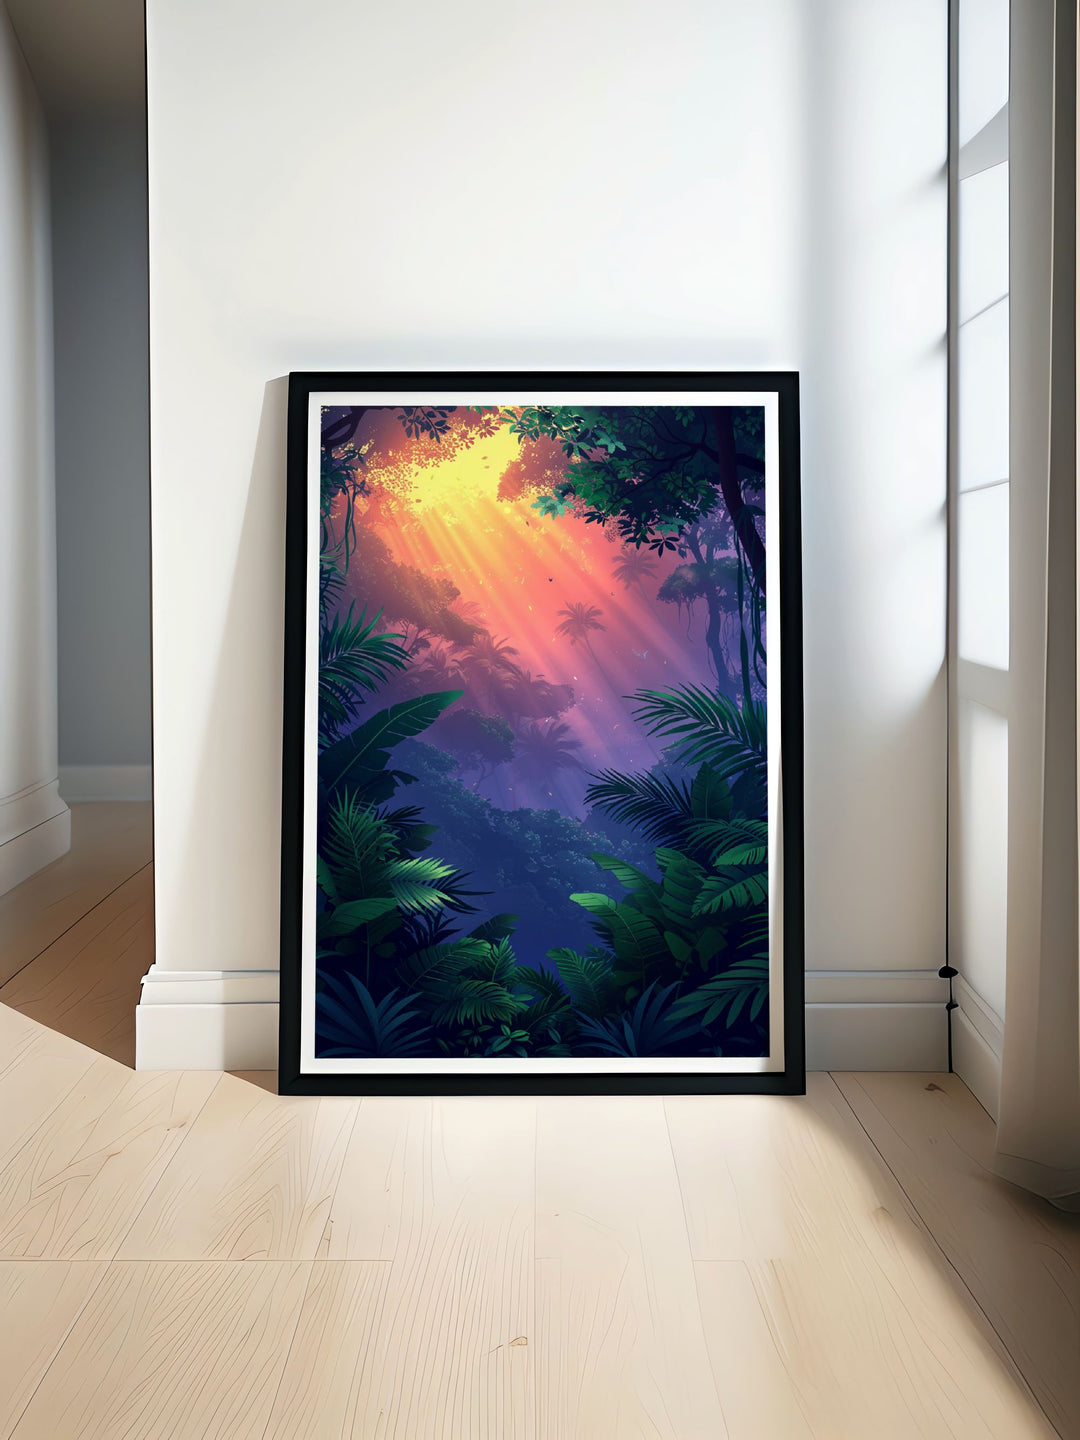 Home decor print illustrating the tranquil beauty of a foggy forest, perfect for adding a touch of natures charm to any space.